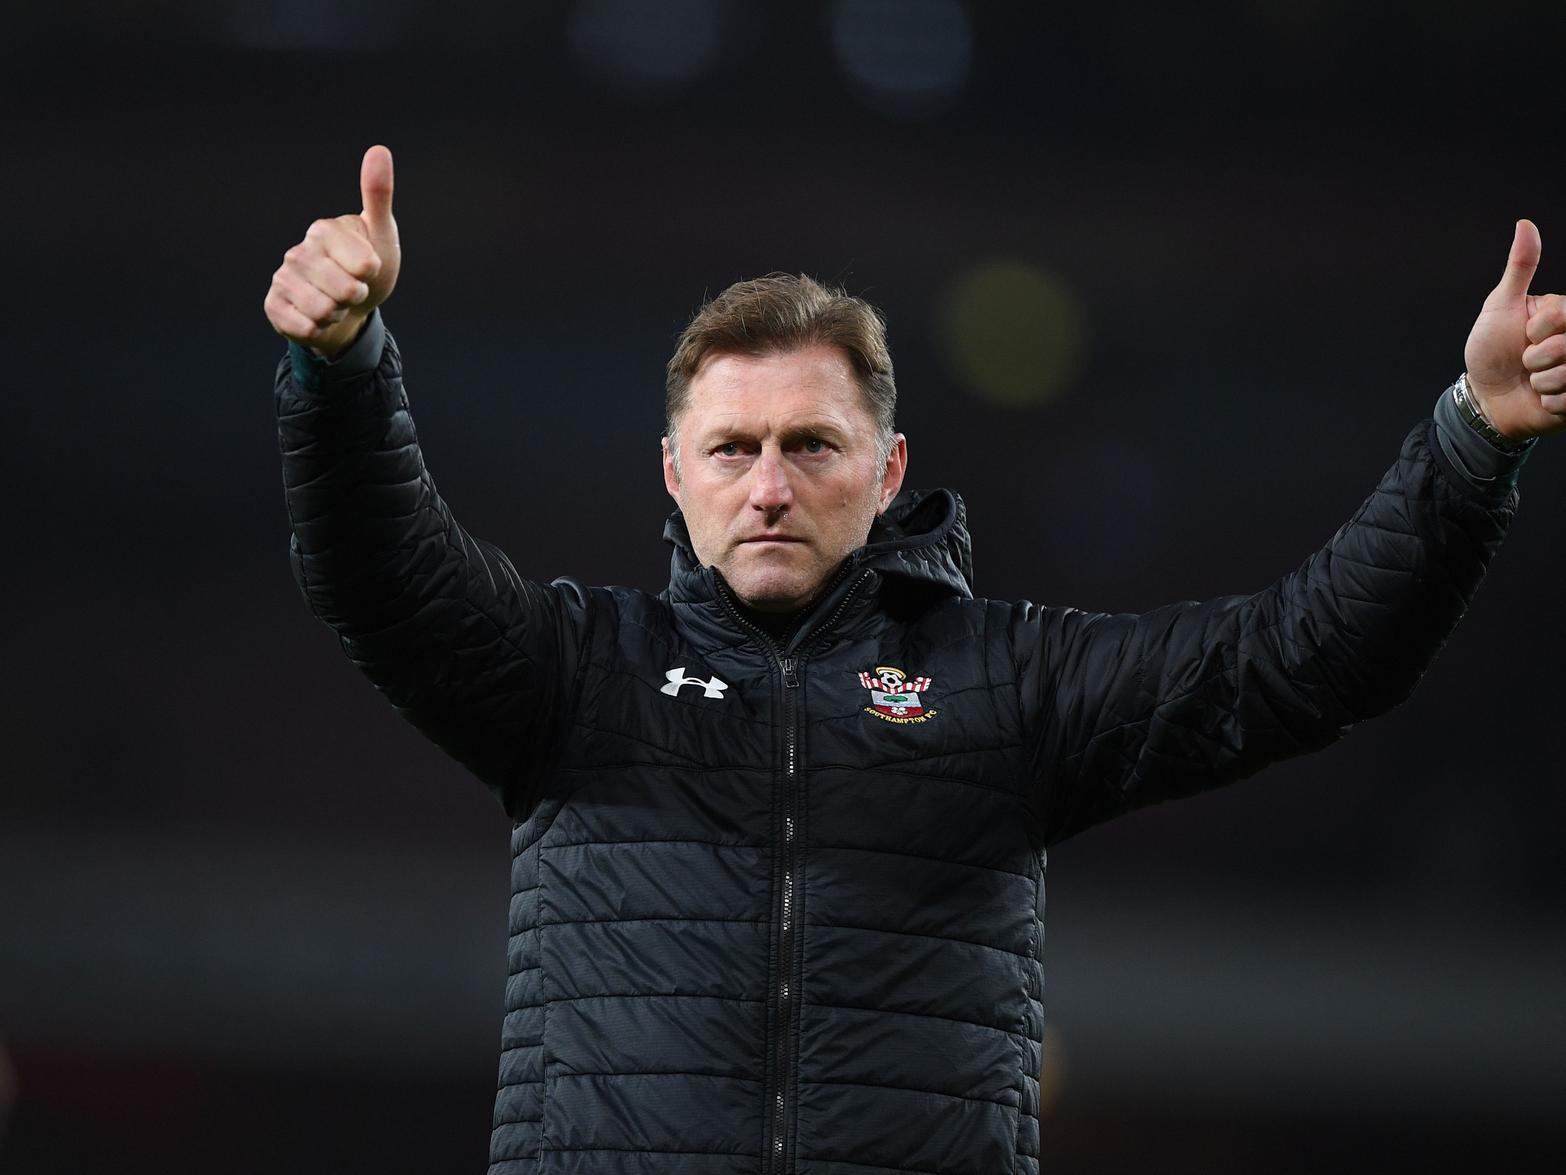 Southampton boss Ralph Hasenhuttl hammered Michael Obafemi for a lack of professionalism in his pre-match presser suggesting all is not well ahead of Watfords visit.